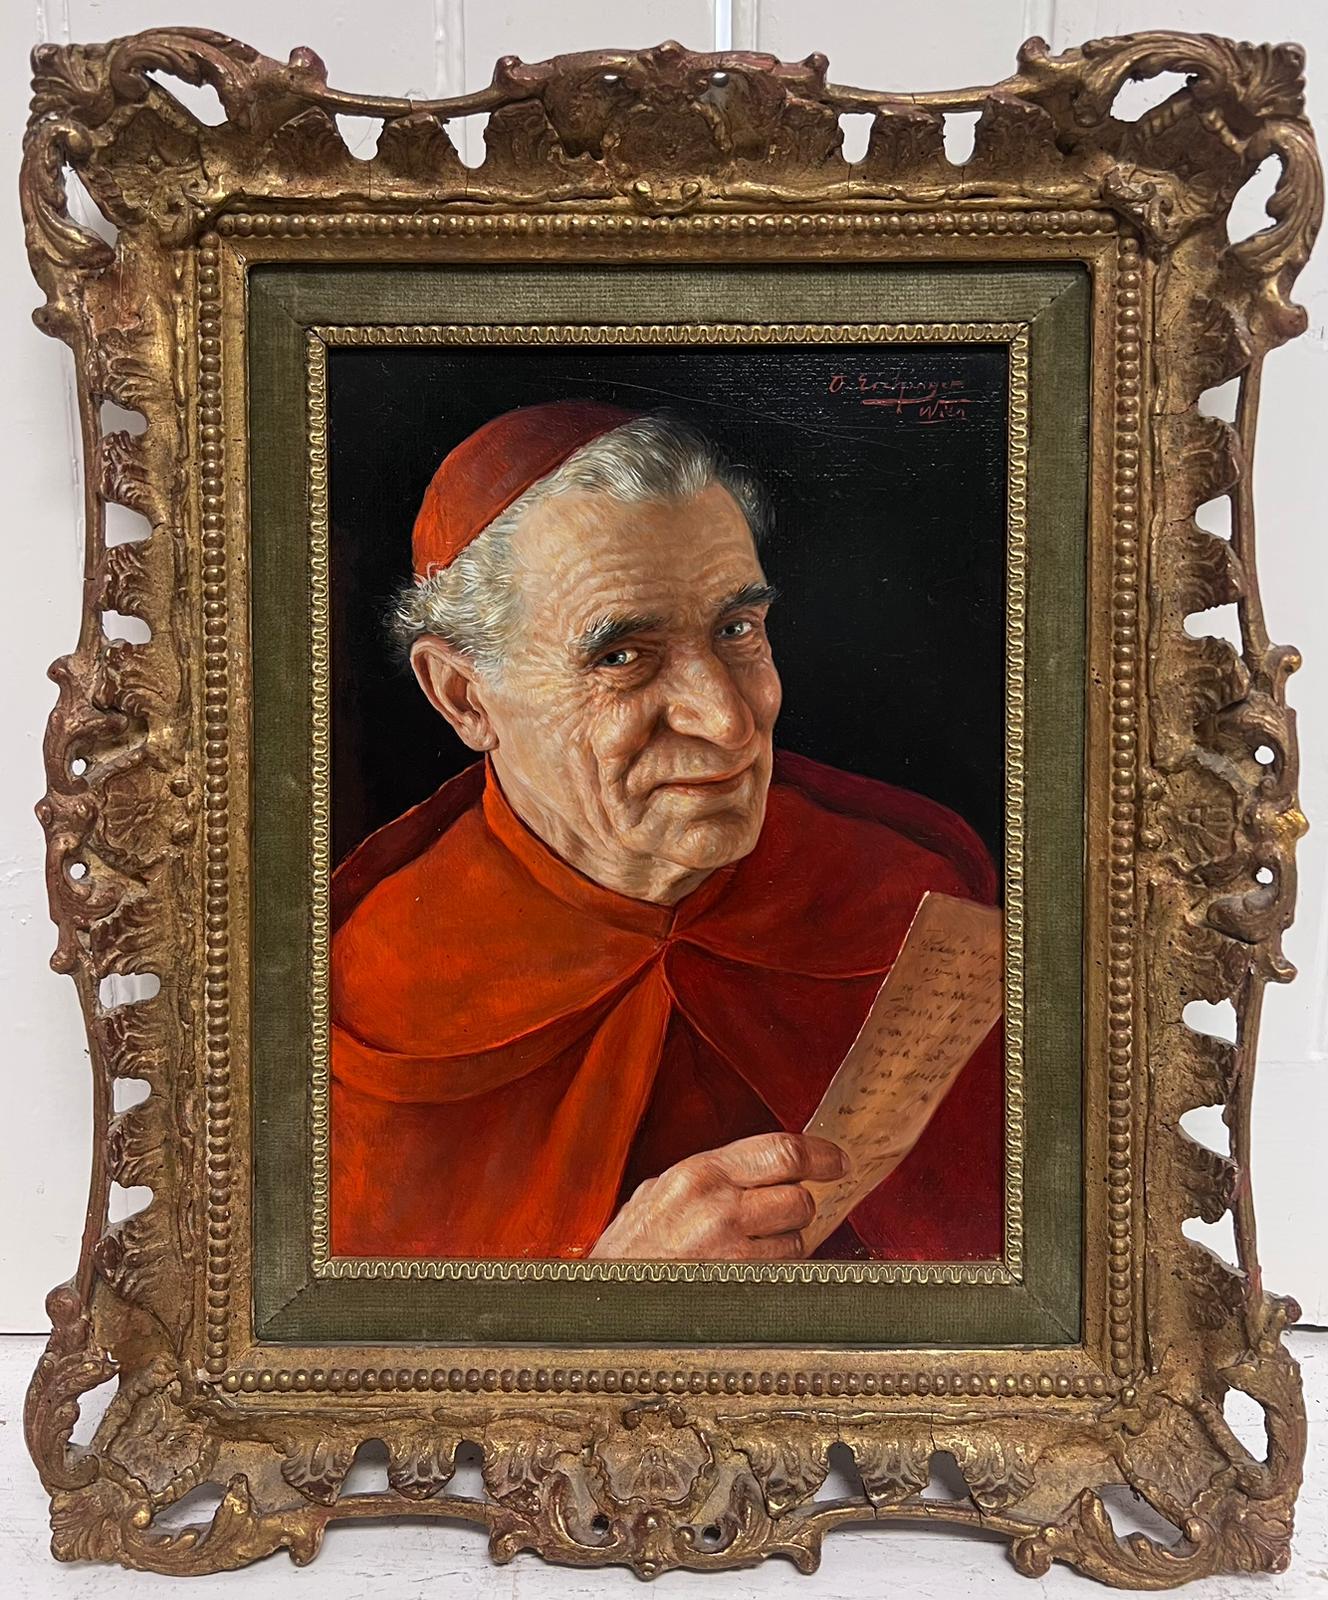 Otto Eichinger Figurative Painting - The Cardinal Fine Antique Portrait Oil Painting in Ornate Gilt Frame